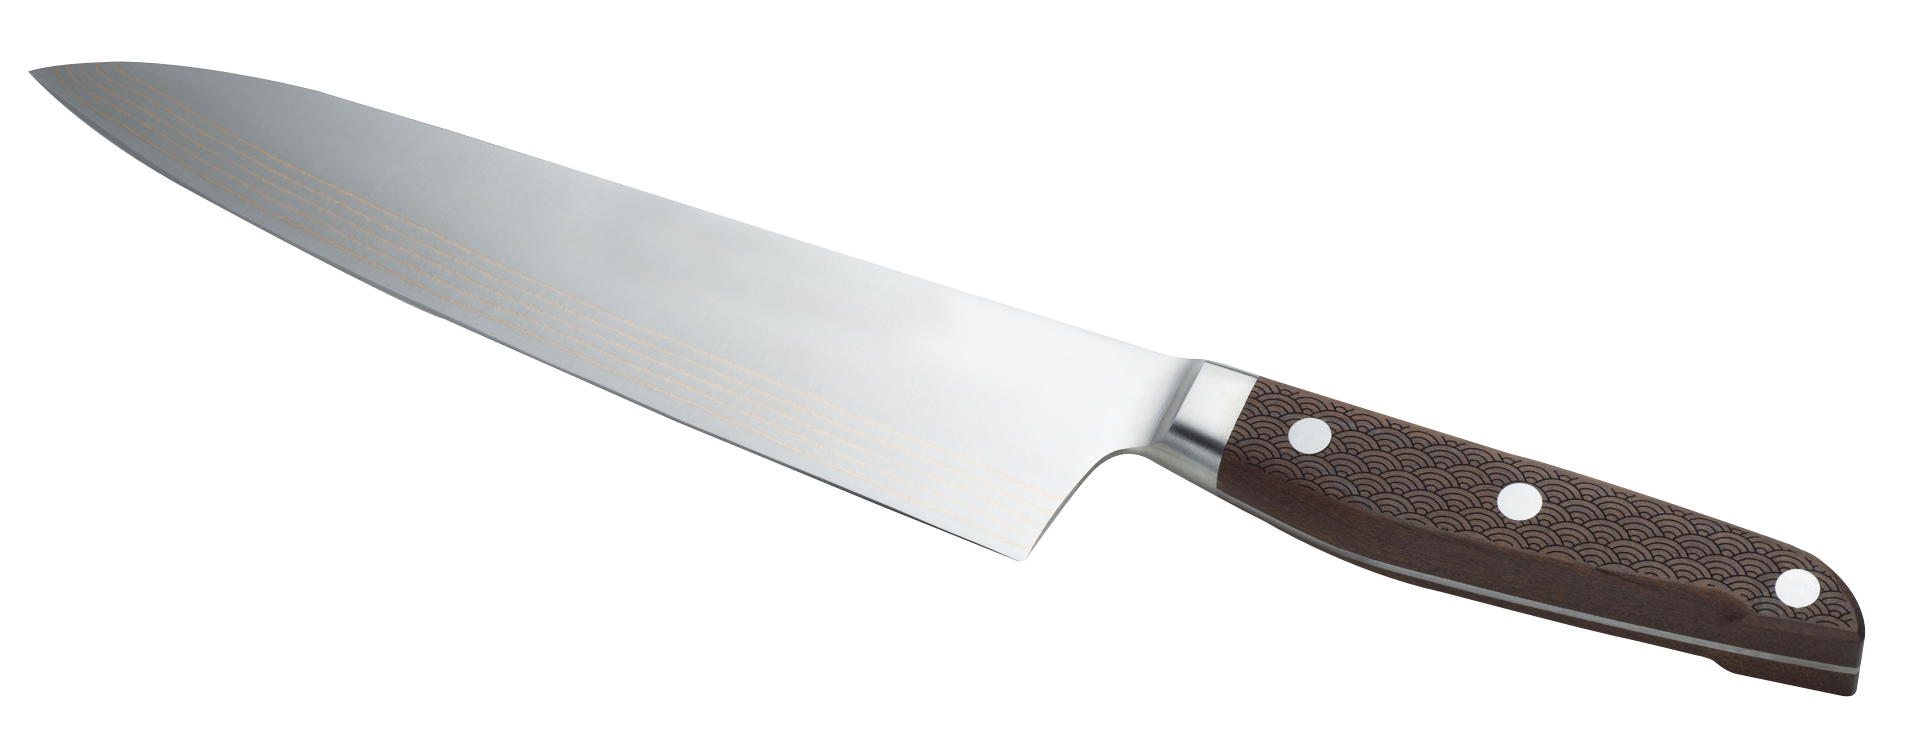 Butter Photos Knife Free PNG HQ PNG Image